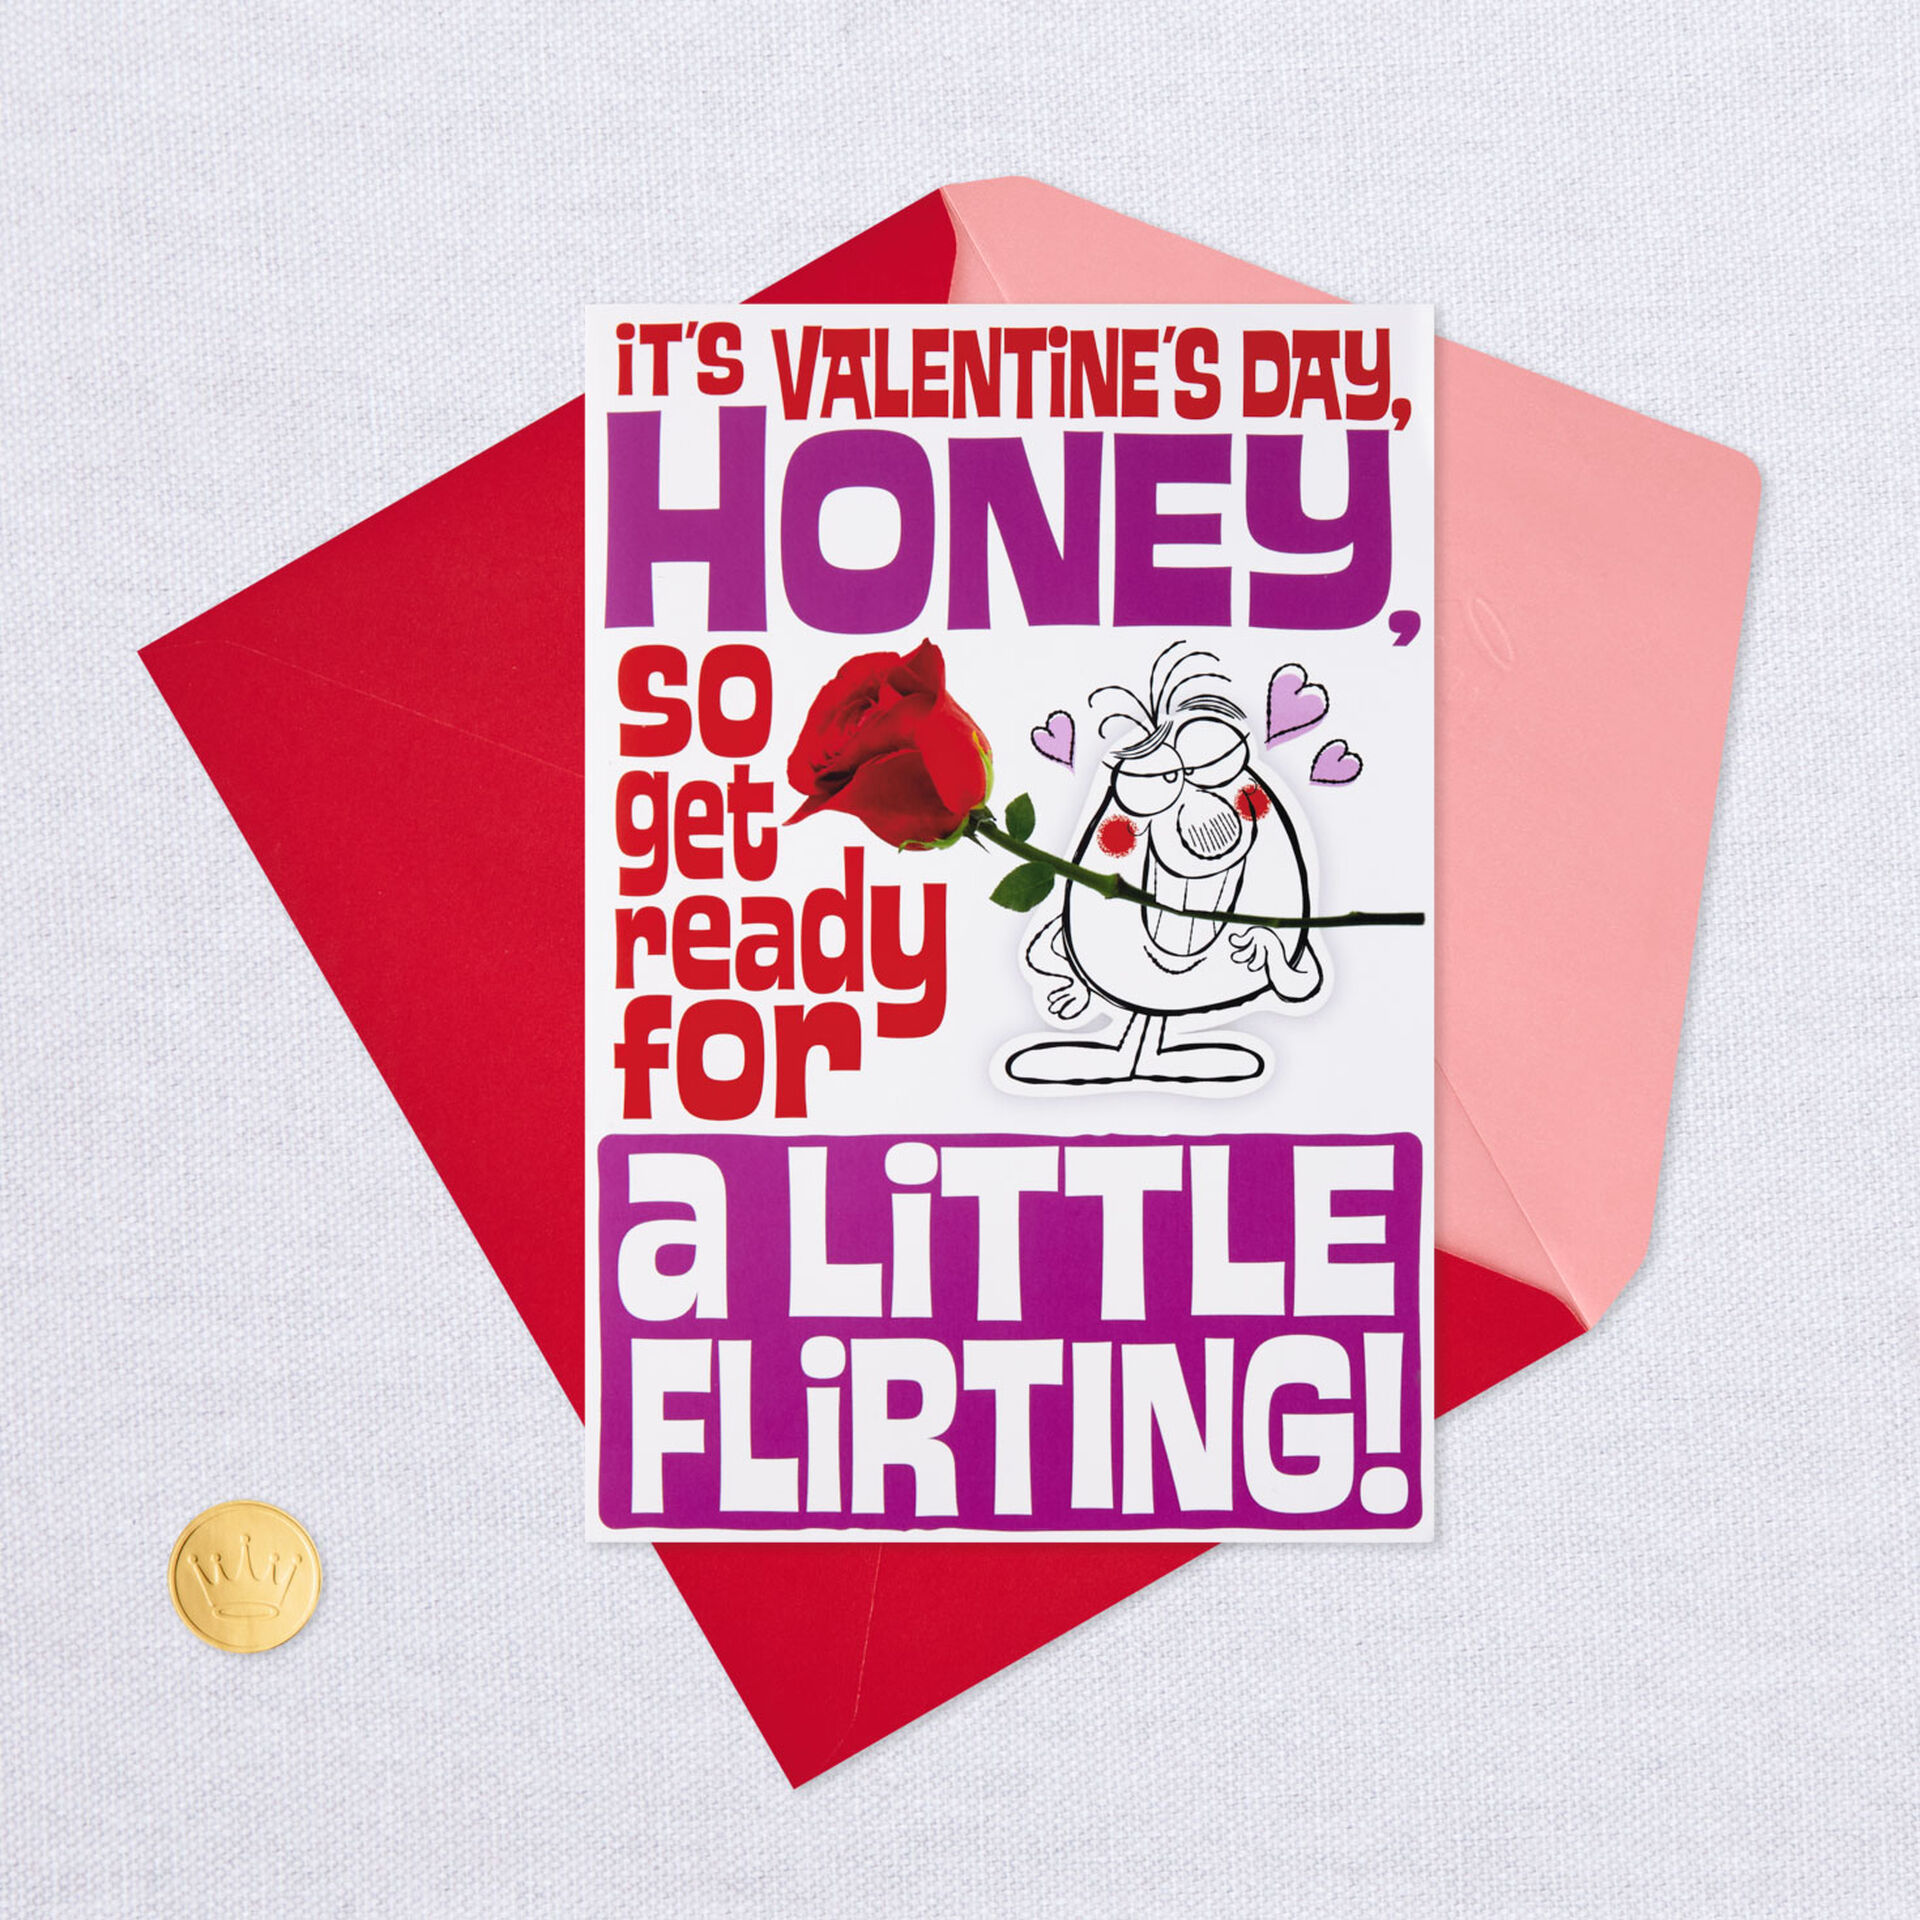 Ready For A Little Flirting Funny Valentines Day Card For Wife